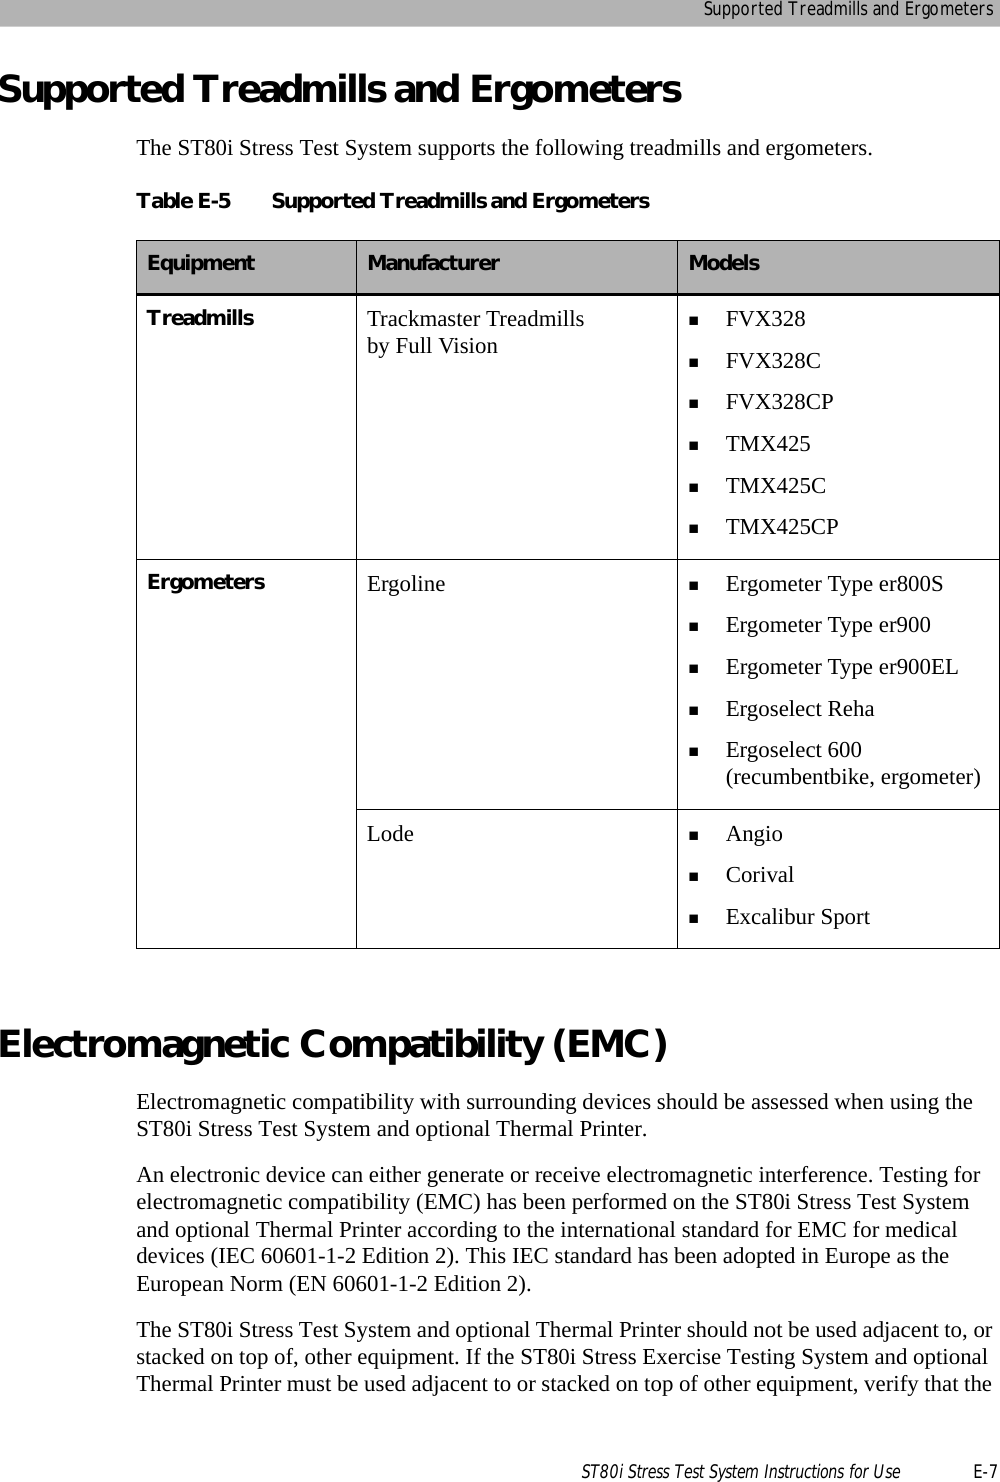 Supported Treadmills and ErgometersST80i Stress Test System Instructions for Use E-7Supported Treadmills and ErgometersThe ST80i Stress Test System supports the following treadmills and ergometers.Electromagnetic Compatibility (EMC)Electromagnetic compatibility with surrounding devices should be assessed when using the ST80i Stress Test System and optional Thermal Printer.An electronic device can either generate or receive electromagnetic interference. Testing for electromagnetic compatibility (EMC) has been performed on the ST80i Stress Test System and optional Thermal Printer according to the international standard for EMC for medical devices (IEC 60601-1-2 Edition 2). This IEC standard has been adopted in Europe as the European Norm (EN 60601-1-2 Edition 2).The ST80i Stress Test System and optional Thermal Printer should not be used adjacent to, or stacked on top of, other equipment. If the ST80i Stress Exercise Testing System and optional Thermal Printer must be used adjacent to or stacked on top of other equipment, verify that the Table E-5 Supported Treadmills and ErgometersEquipment Manufacturer ModelsTreadmills Trackmaster Treadmills by Full VisionFVX328FVX328CFVX328CPTMX425TMX425CTMX425CPErgometers Ergoline Ergometer Type er800SErgometer Type er900Ergometer Type er900ELErgoselect RehaErgoselect 600 (recumbentbike, ergometer)Lode AngioCorivalExcalibur Sport